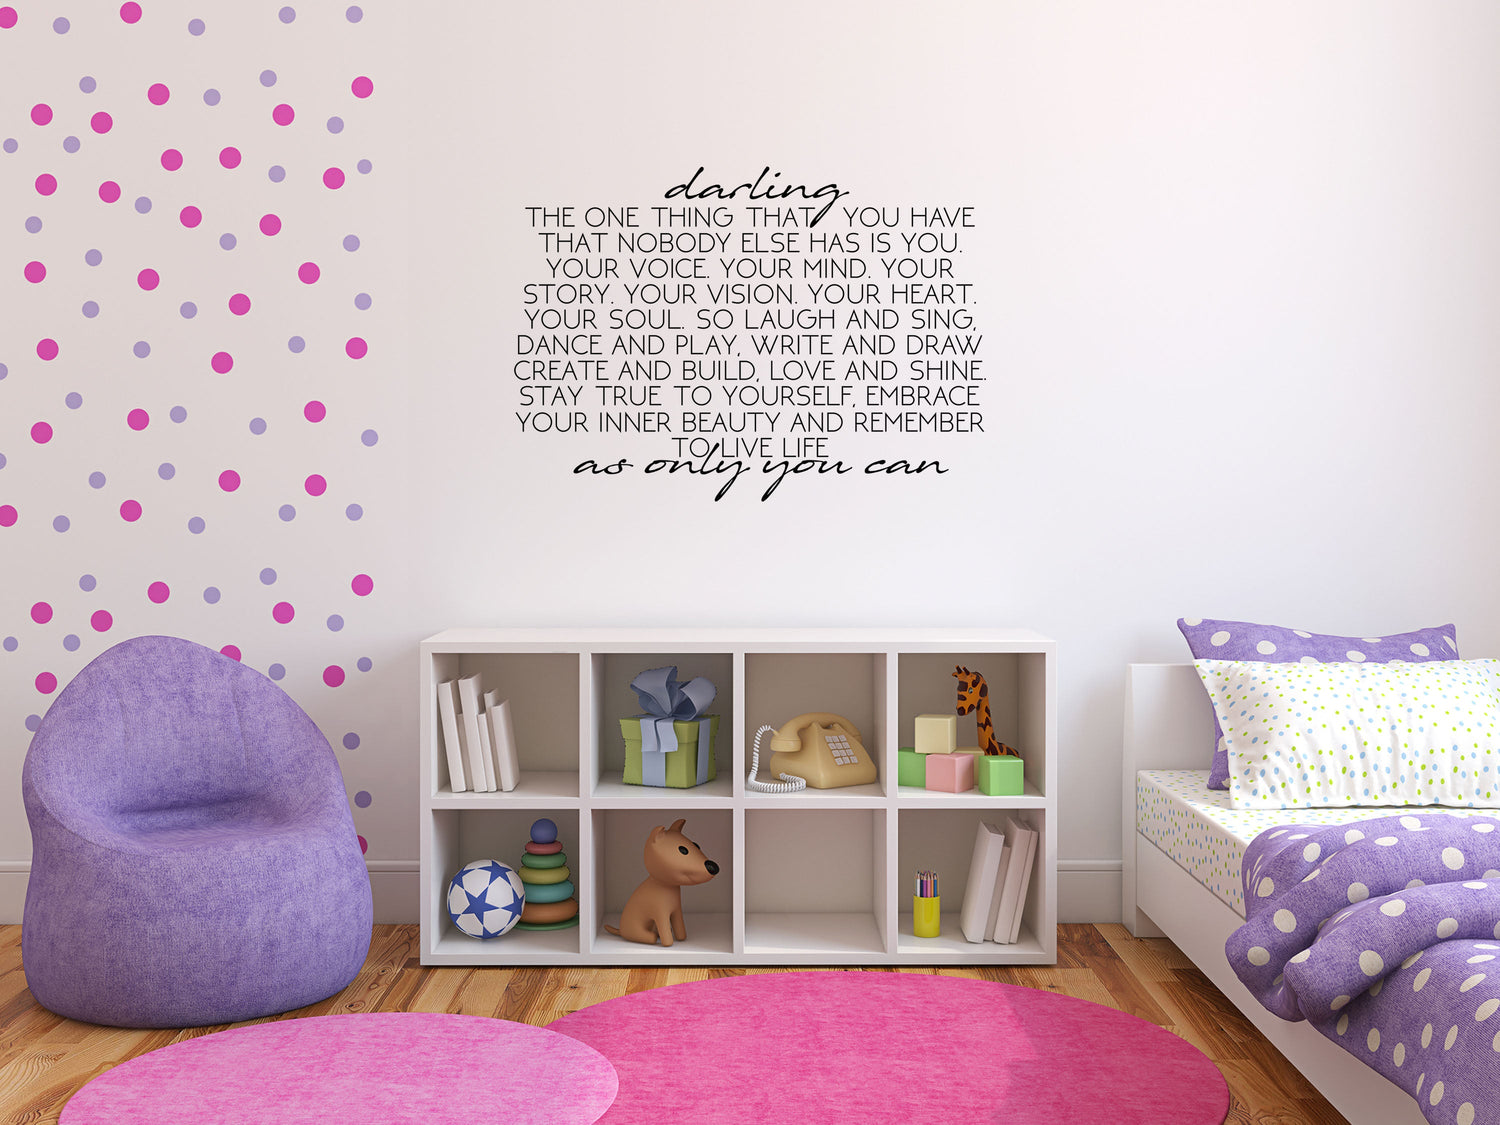 Darling Girl's Room Quote - Inspirational Wall Decals Vinyl Wall Decal Inspirational Wall Signs 